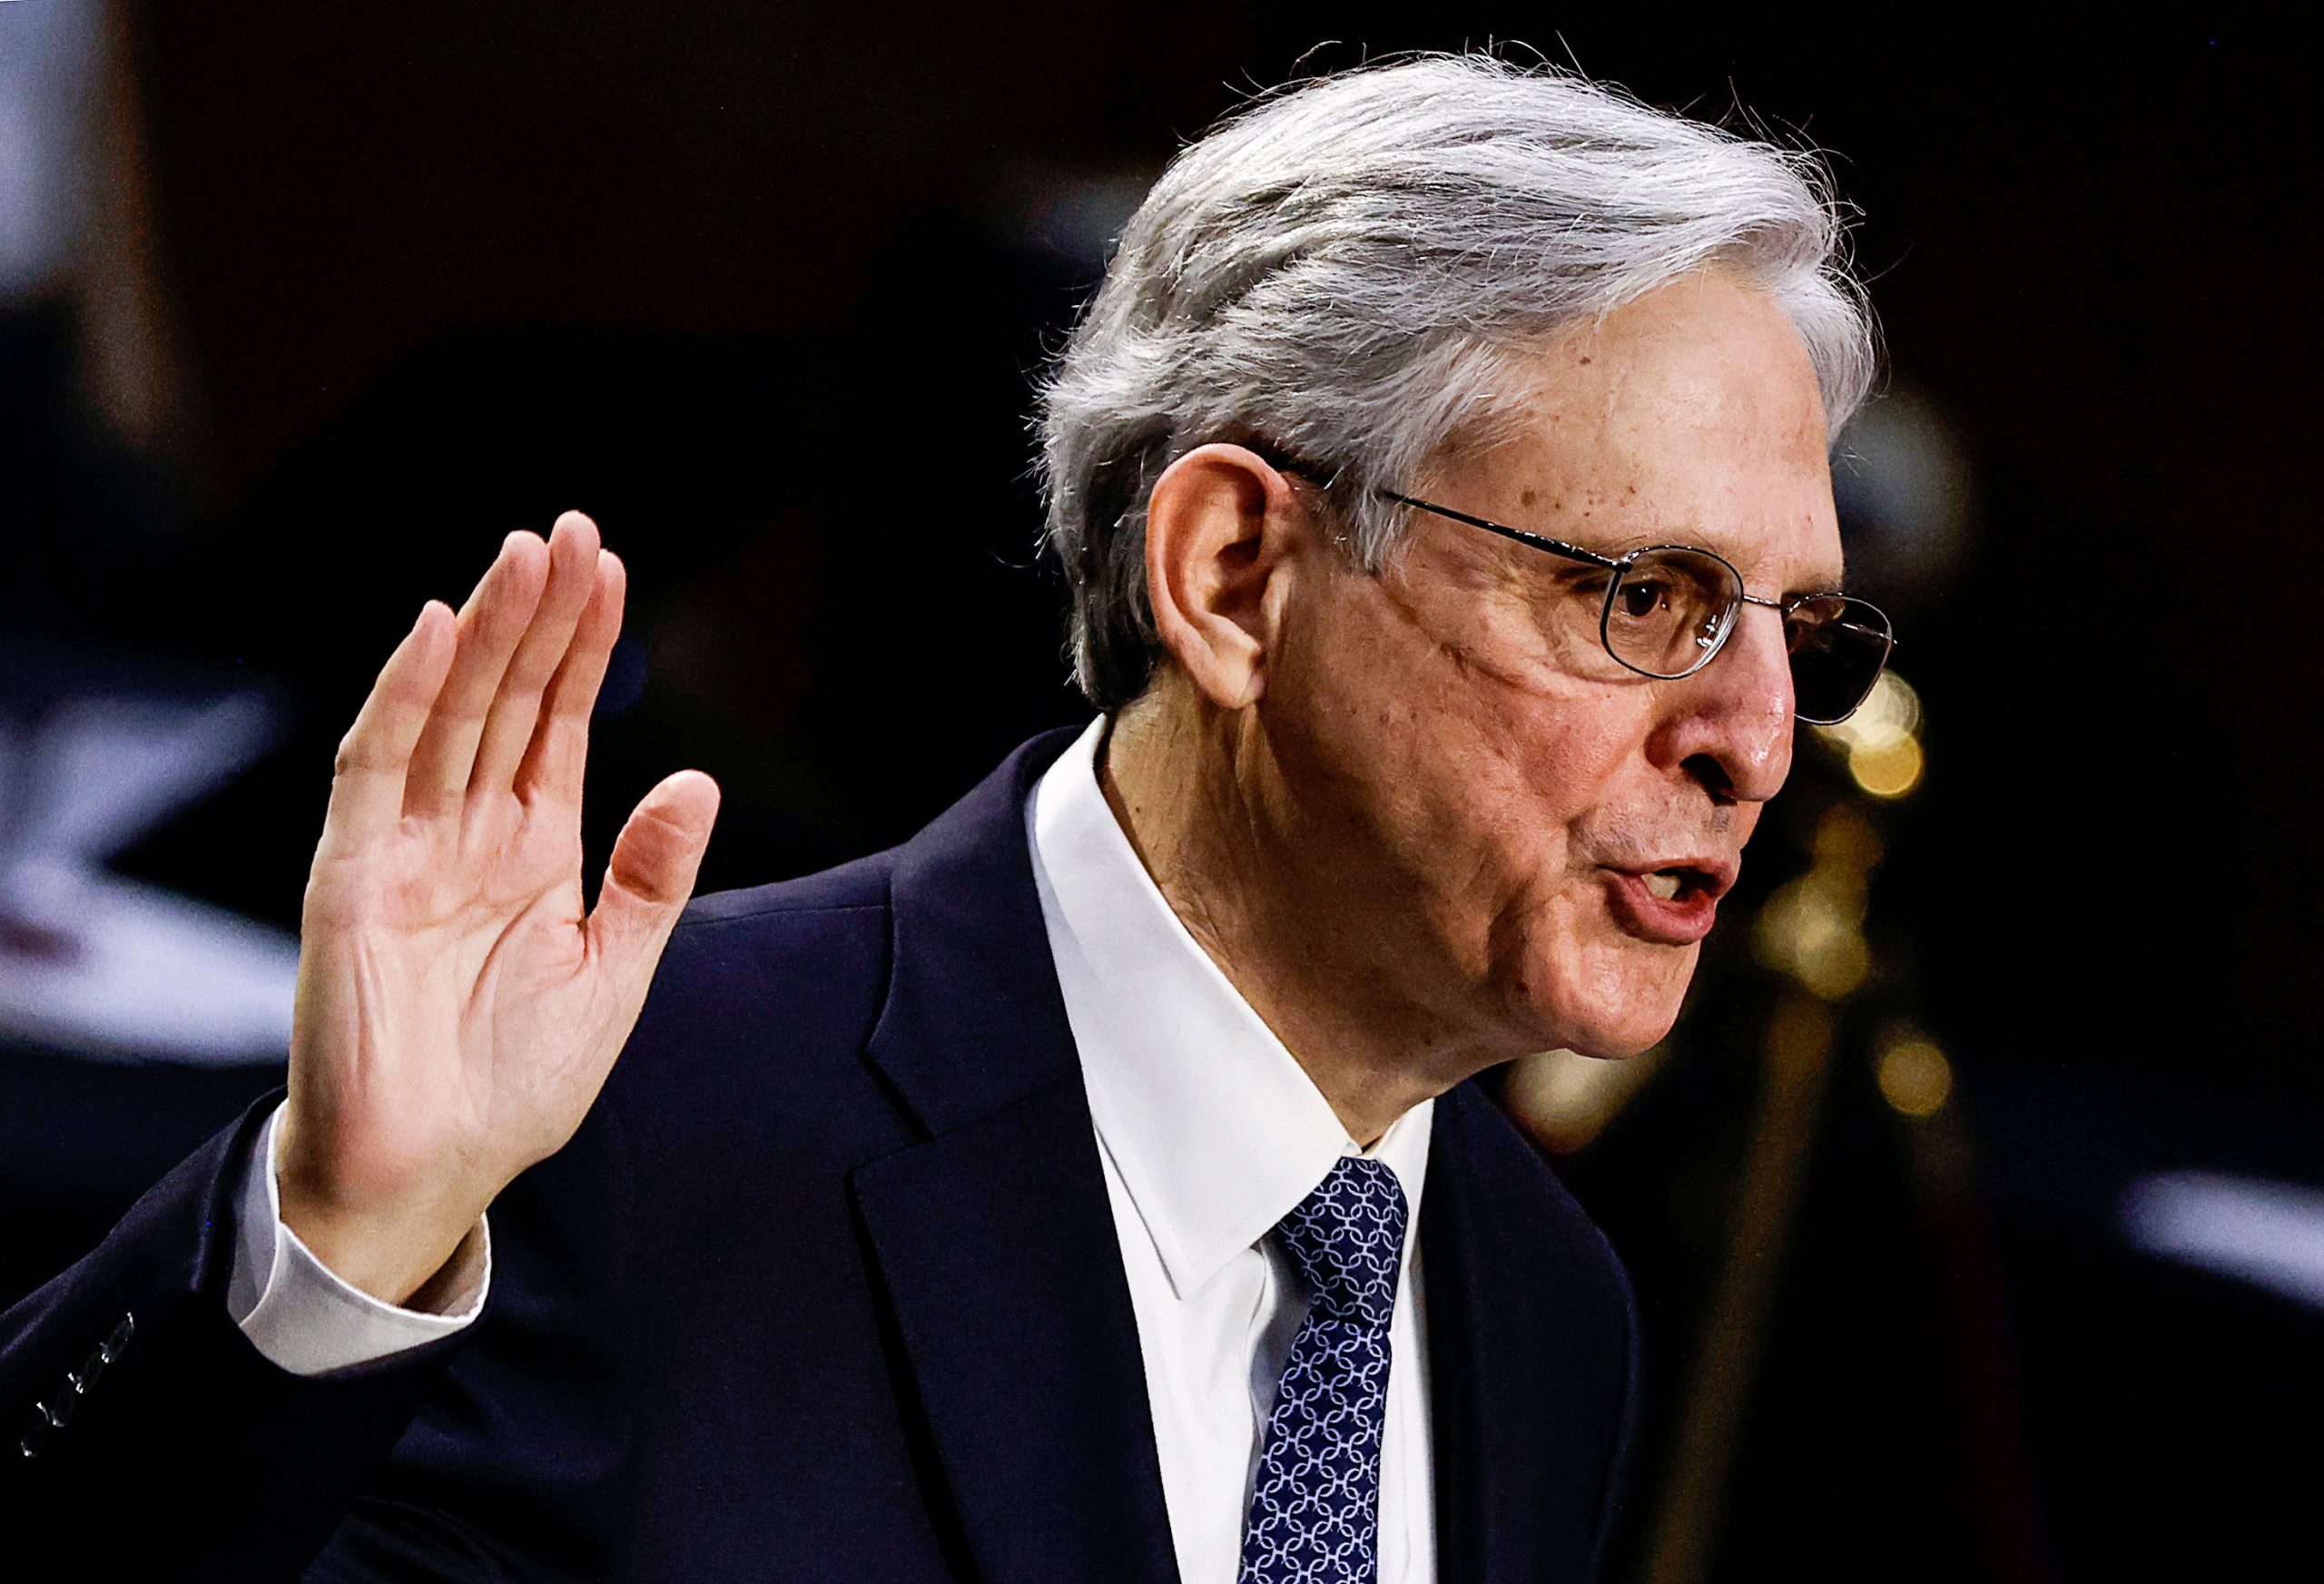 Tackling extremism in the US will be the ‘first priority’, says Merrick Garland